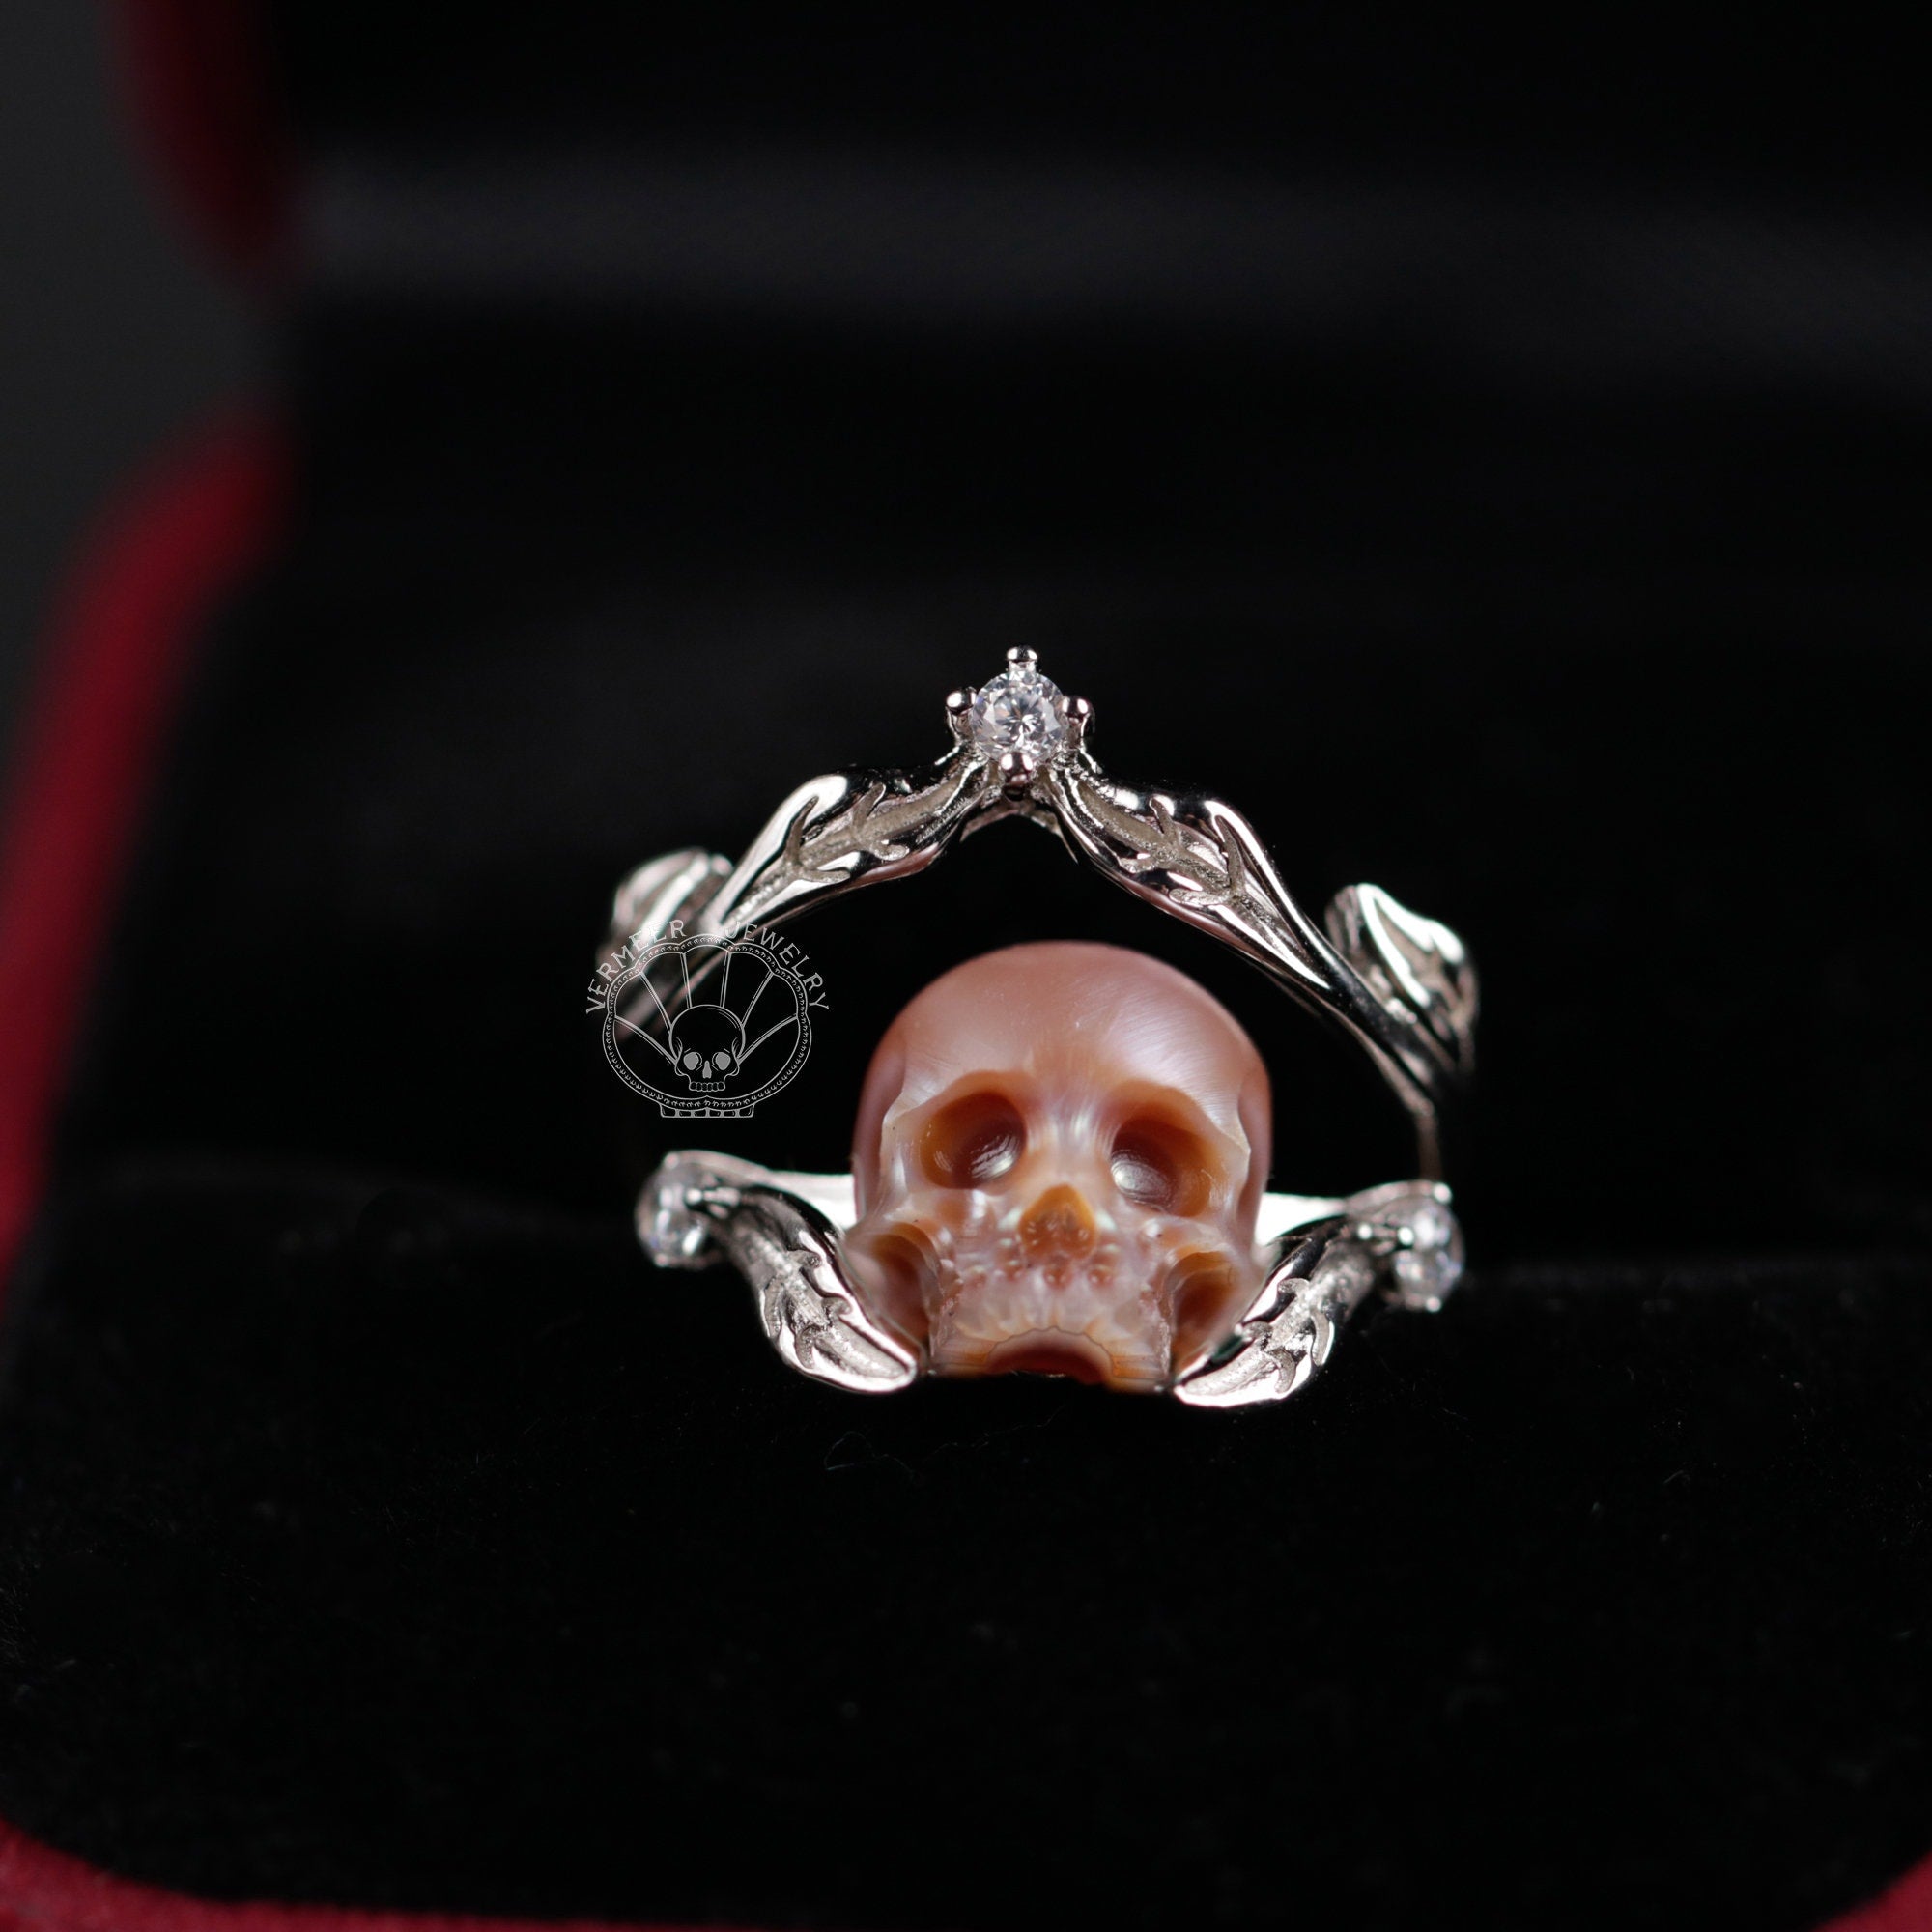 pearl carved skull ring &#39;&#39;elve of the forest&#39;&#39; stacking bands sterling silver rings for women gothic dark jewelry statement ring gift for her.jpg